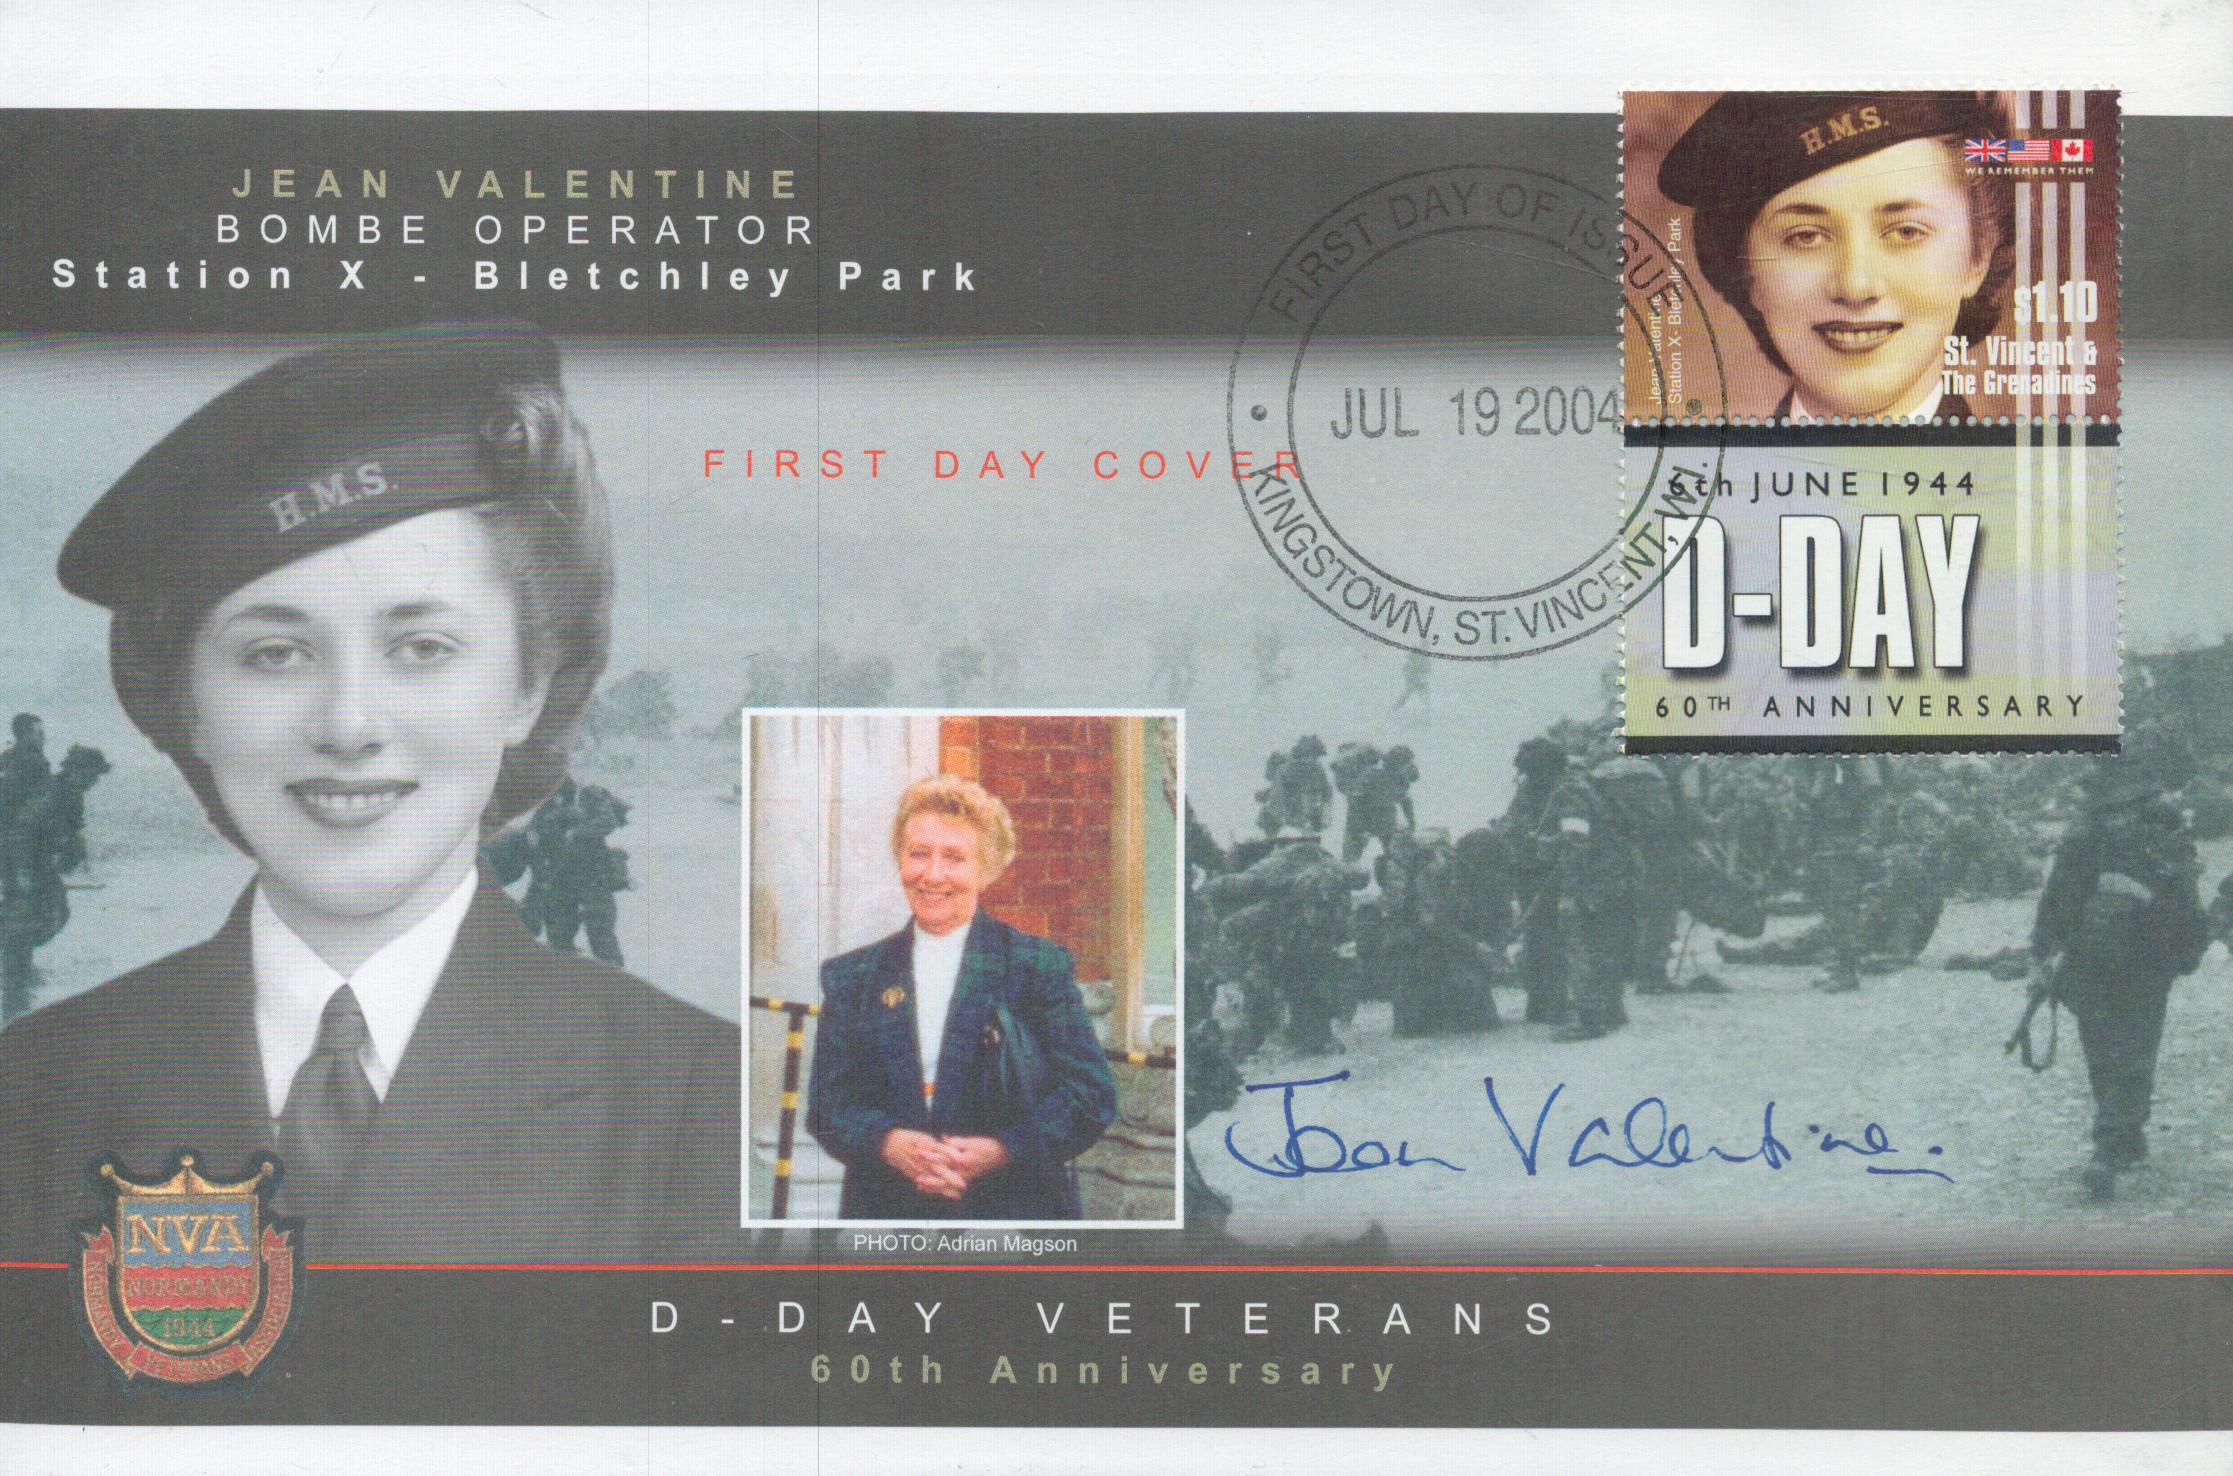 WW2 Bletchley Park codebreaker Jean Valentine signed 2004 60th ann D-Day cover dedicated to her.